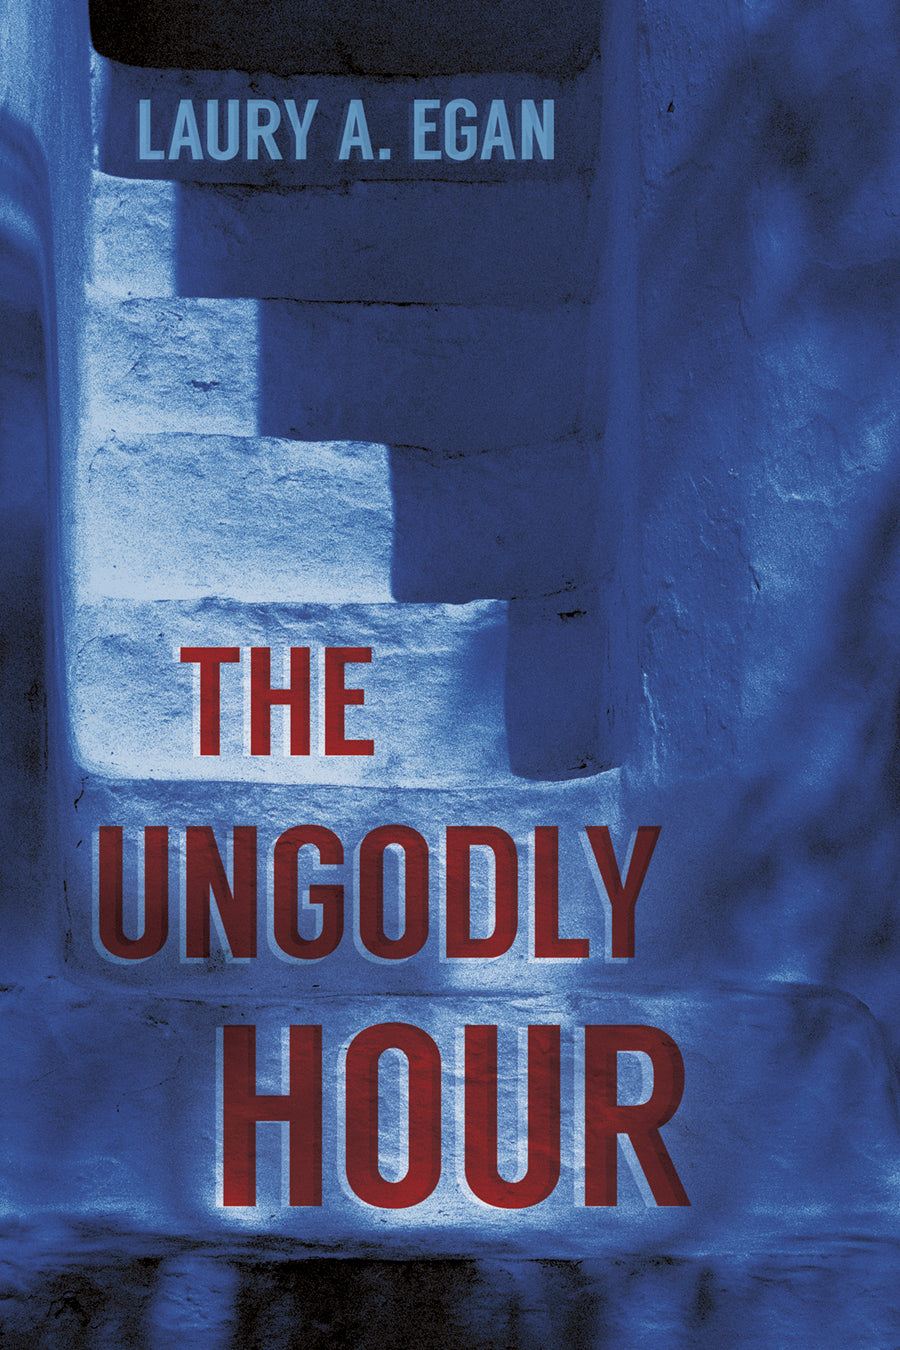 The Ungodly Hour by Laury A. Egan (ebook edition)